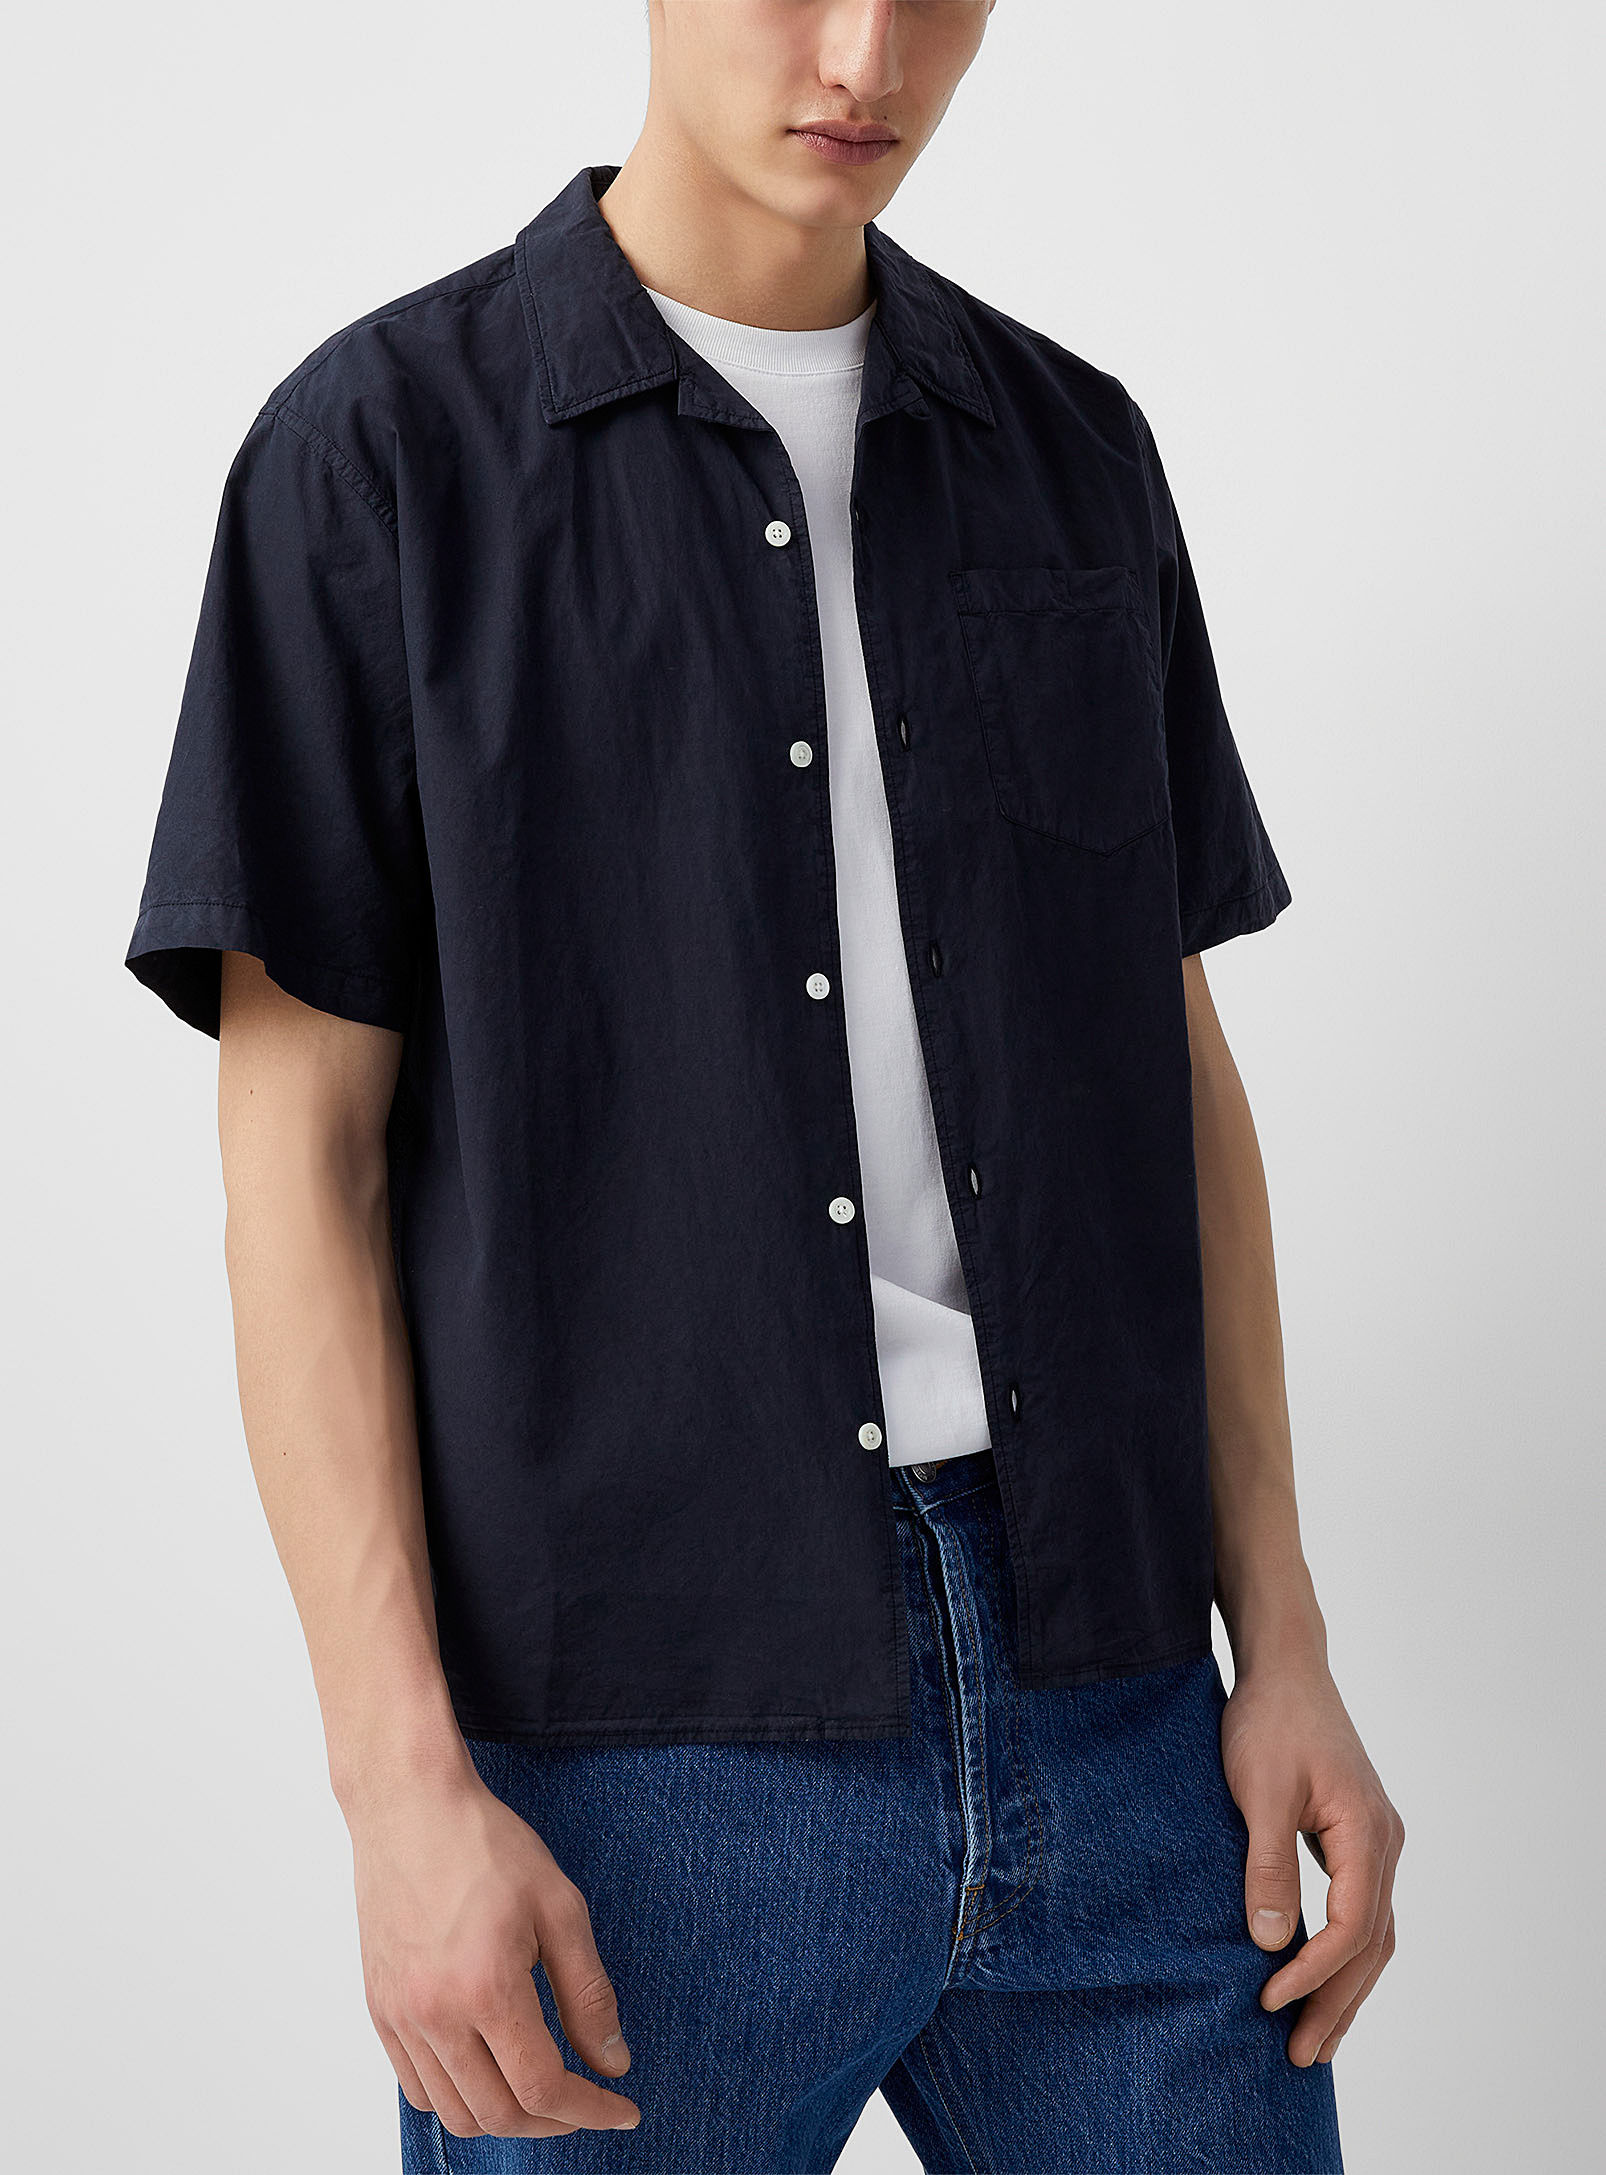 NORSE PROJECTS CARSTEN COTTON BLEND SHIRT